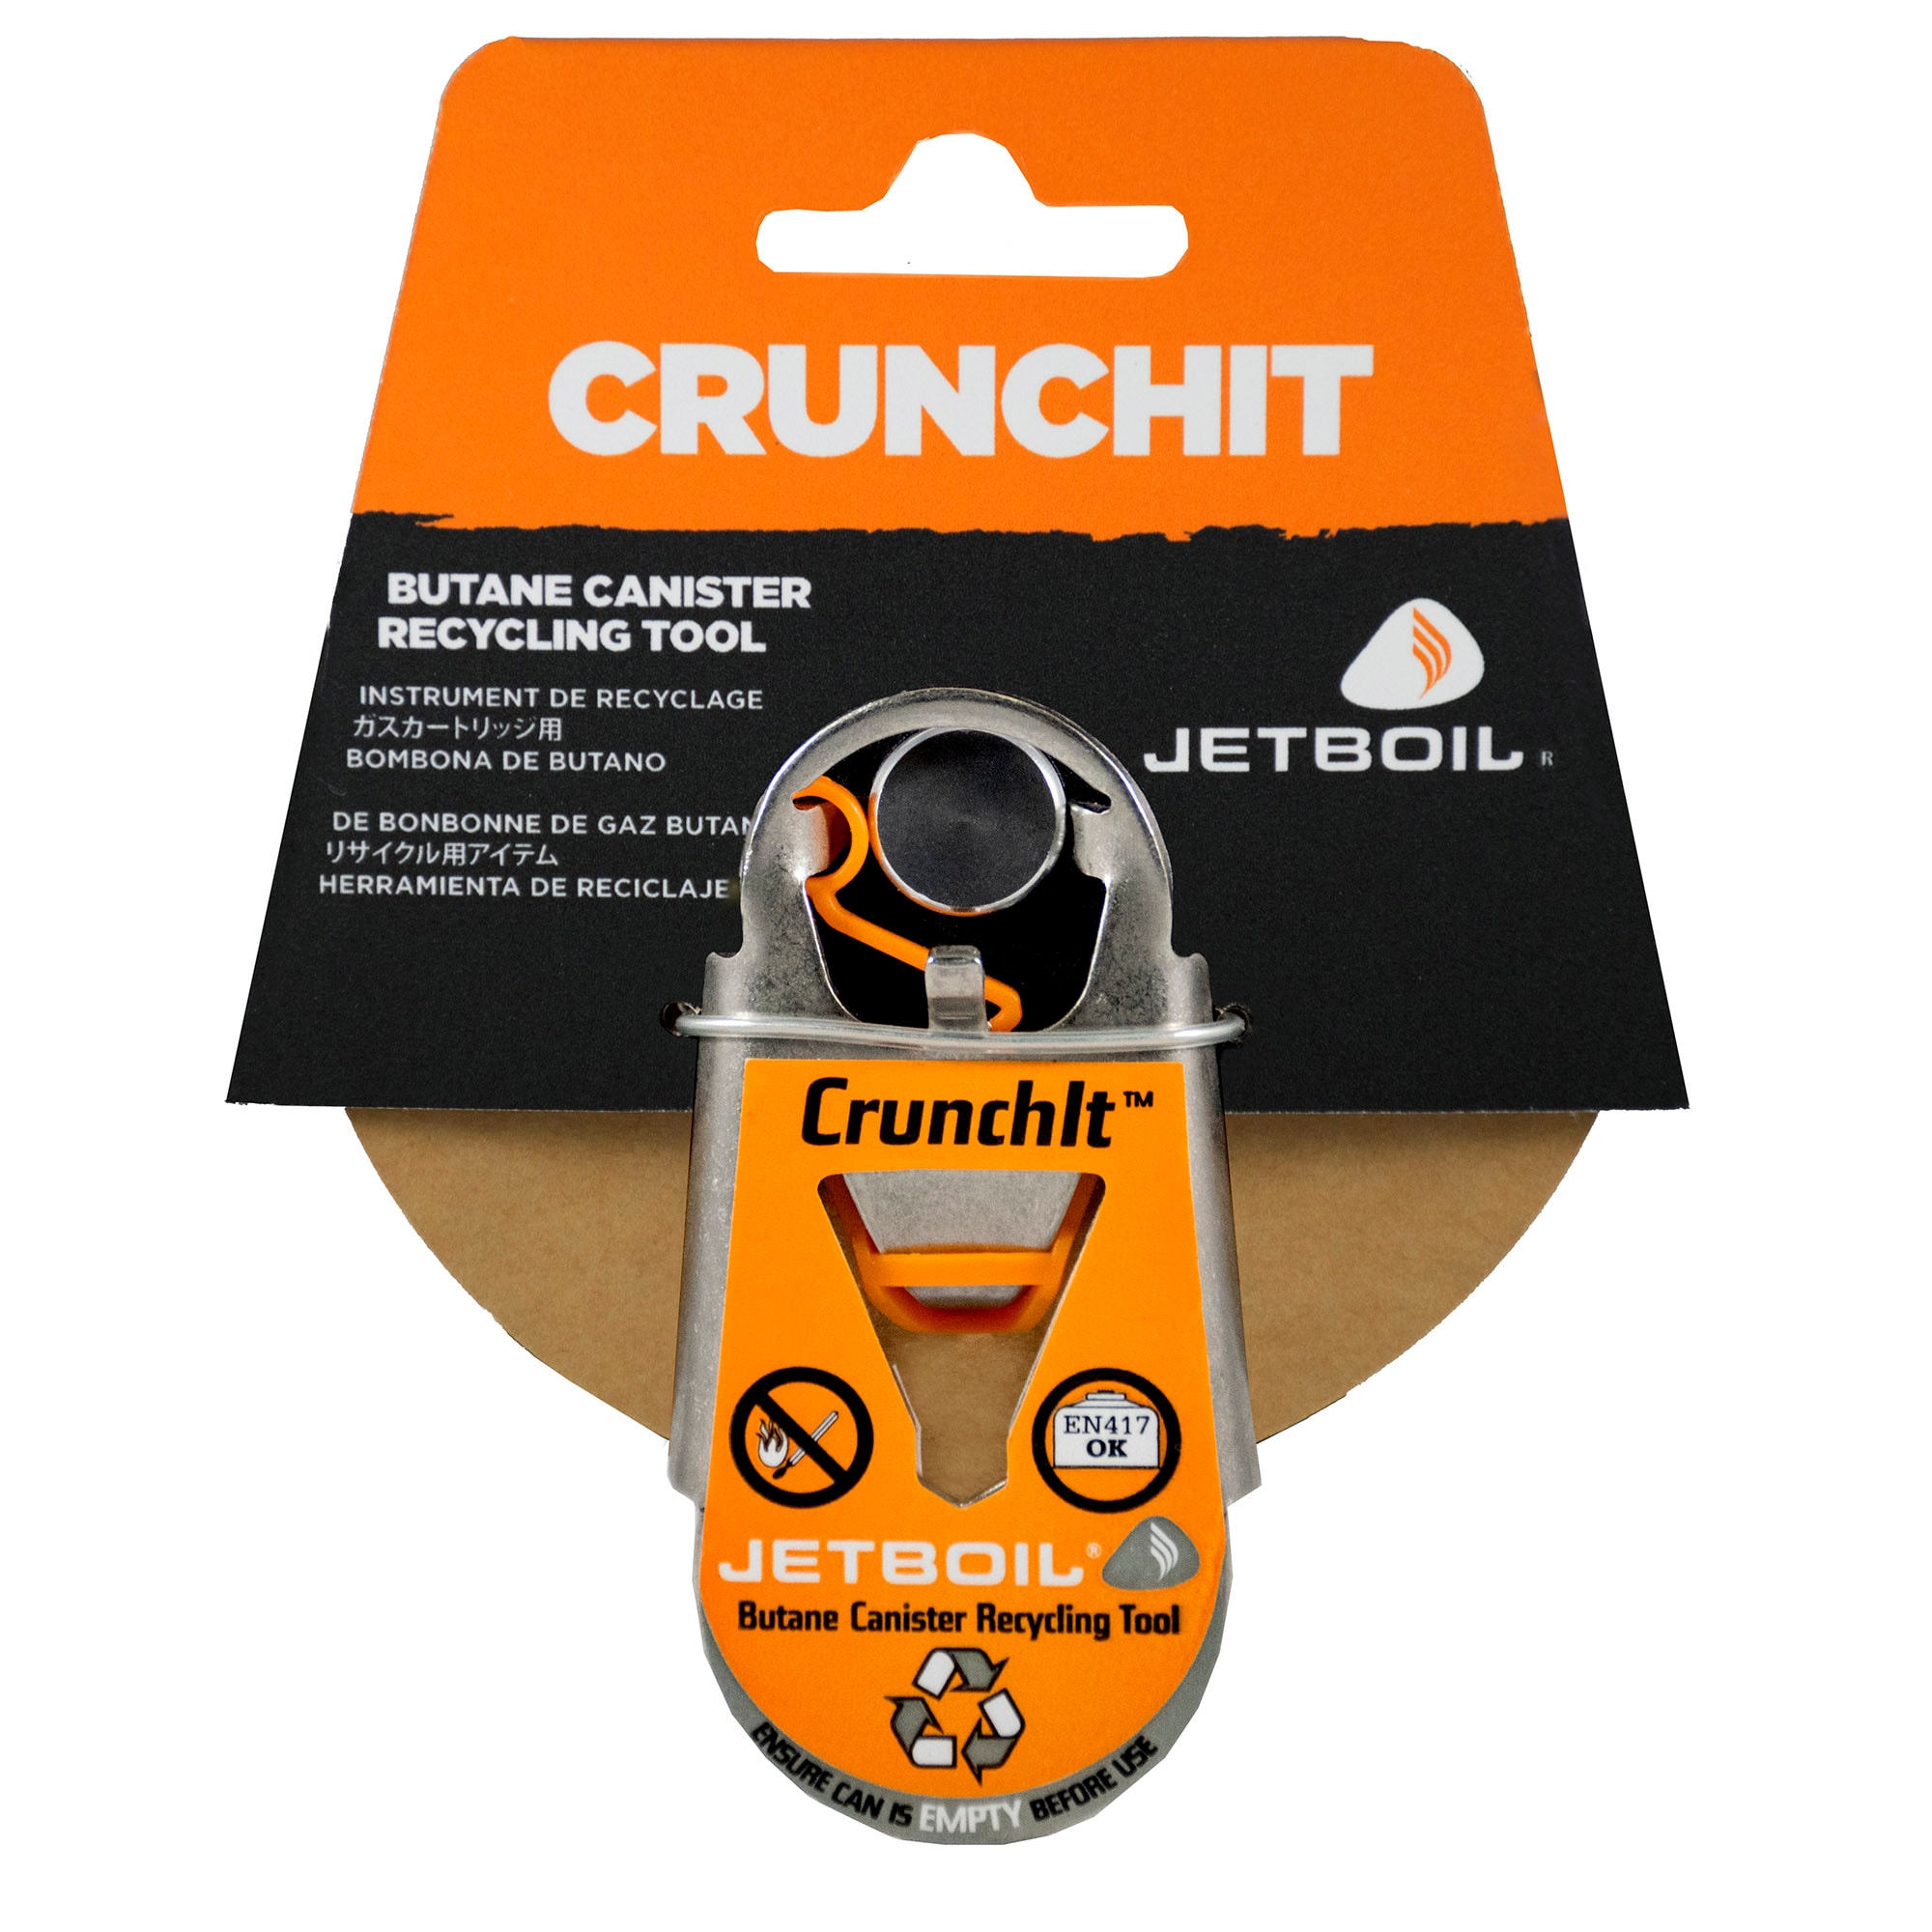 Jetboil Acc Crunchit recycling tool